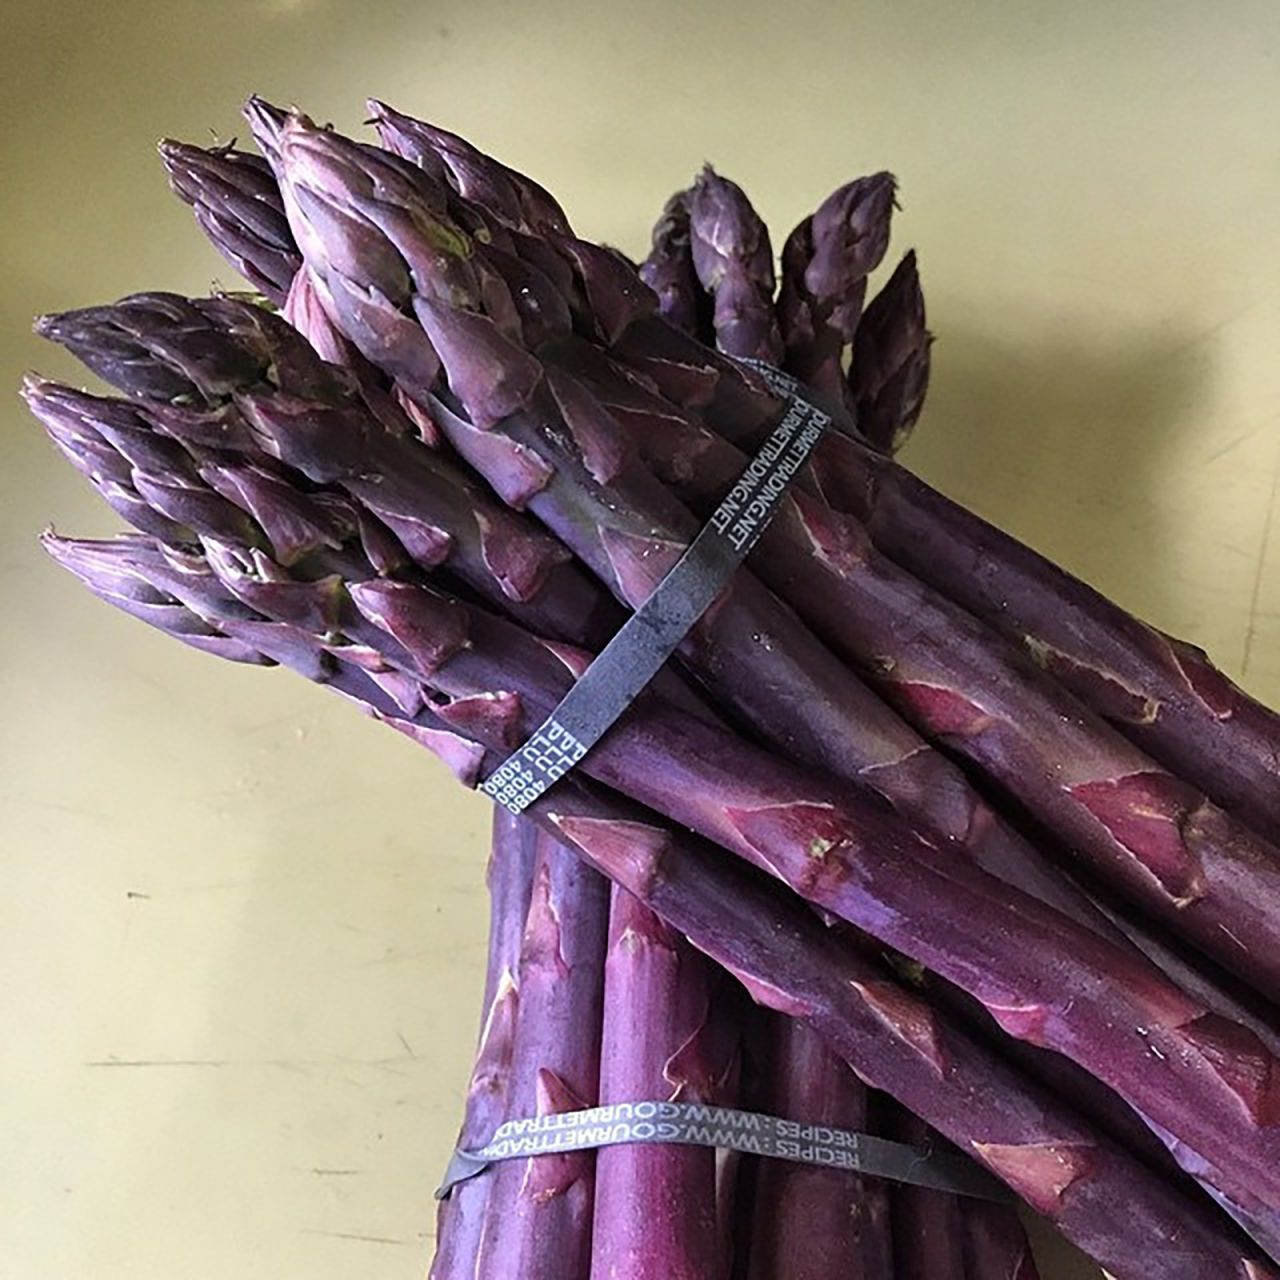 While it tastes the same as the white and green varieties, purple asparagus is rich in antioxidants. 